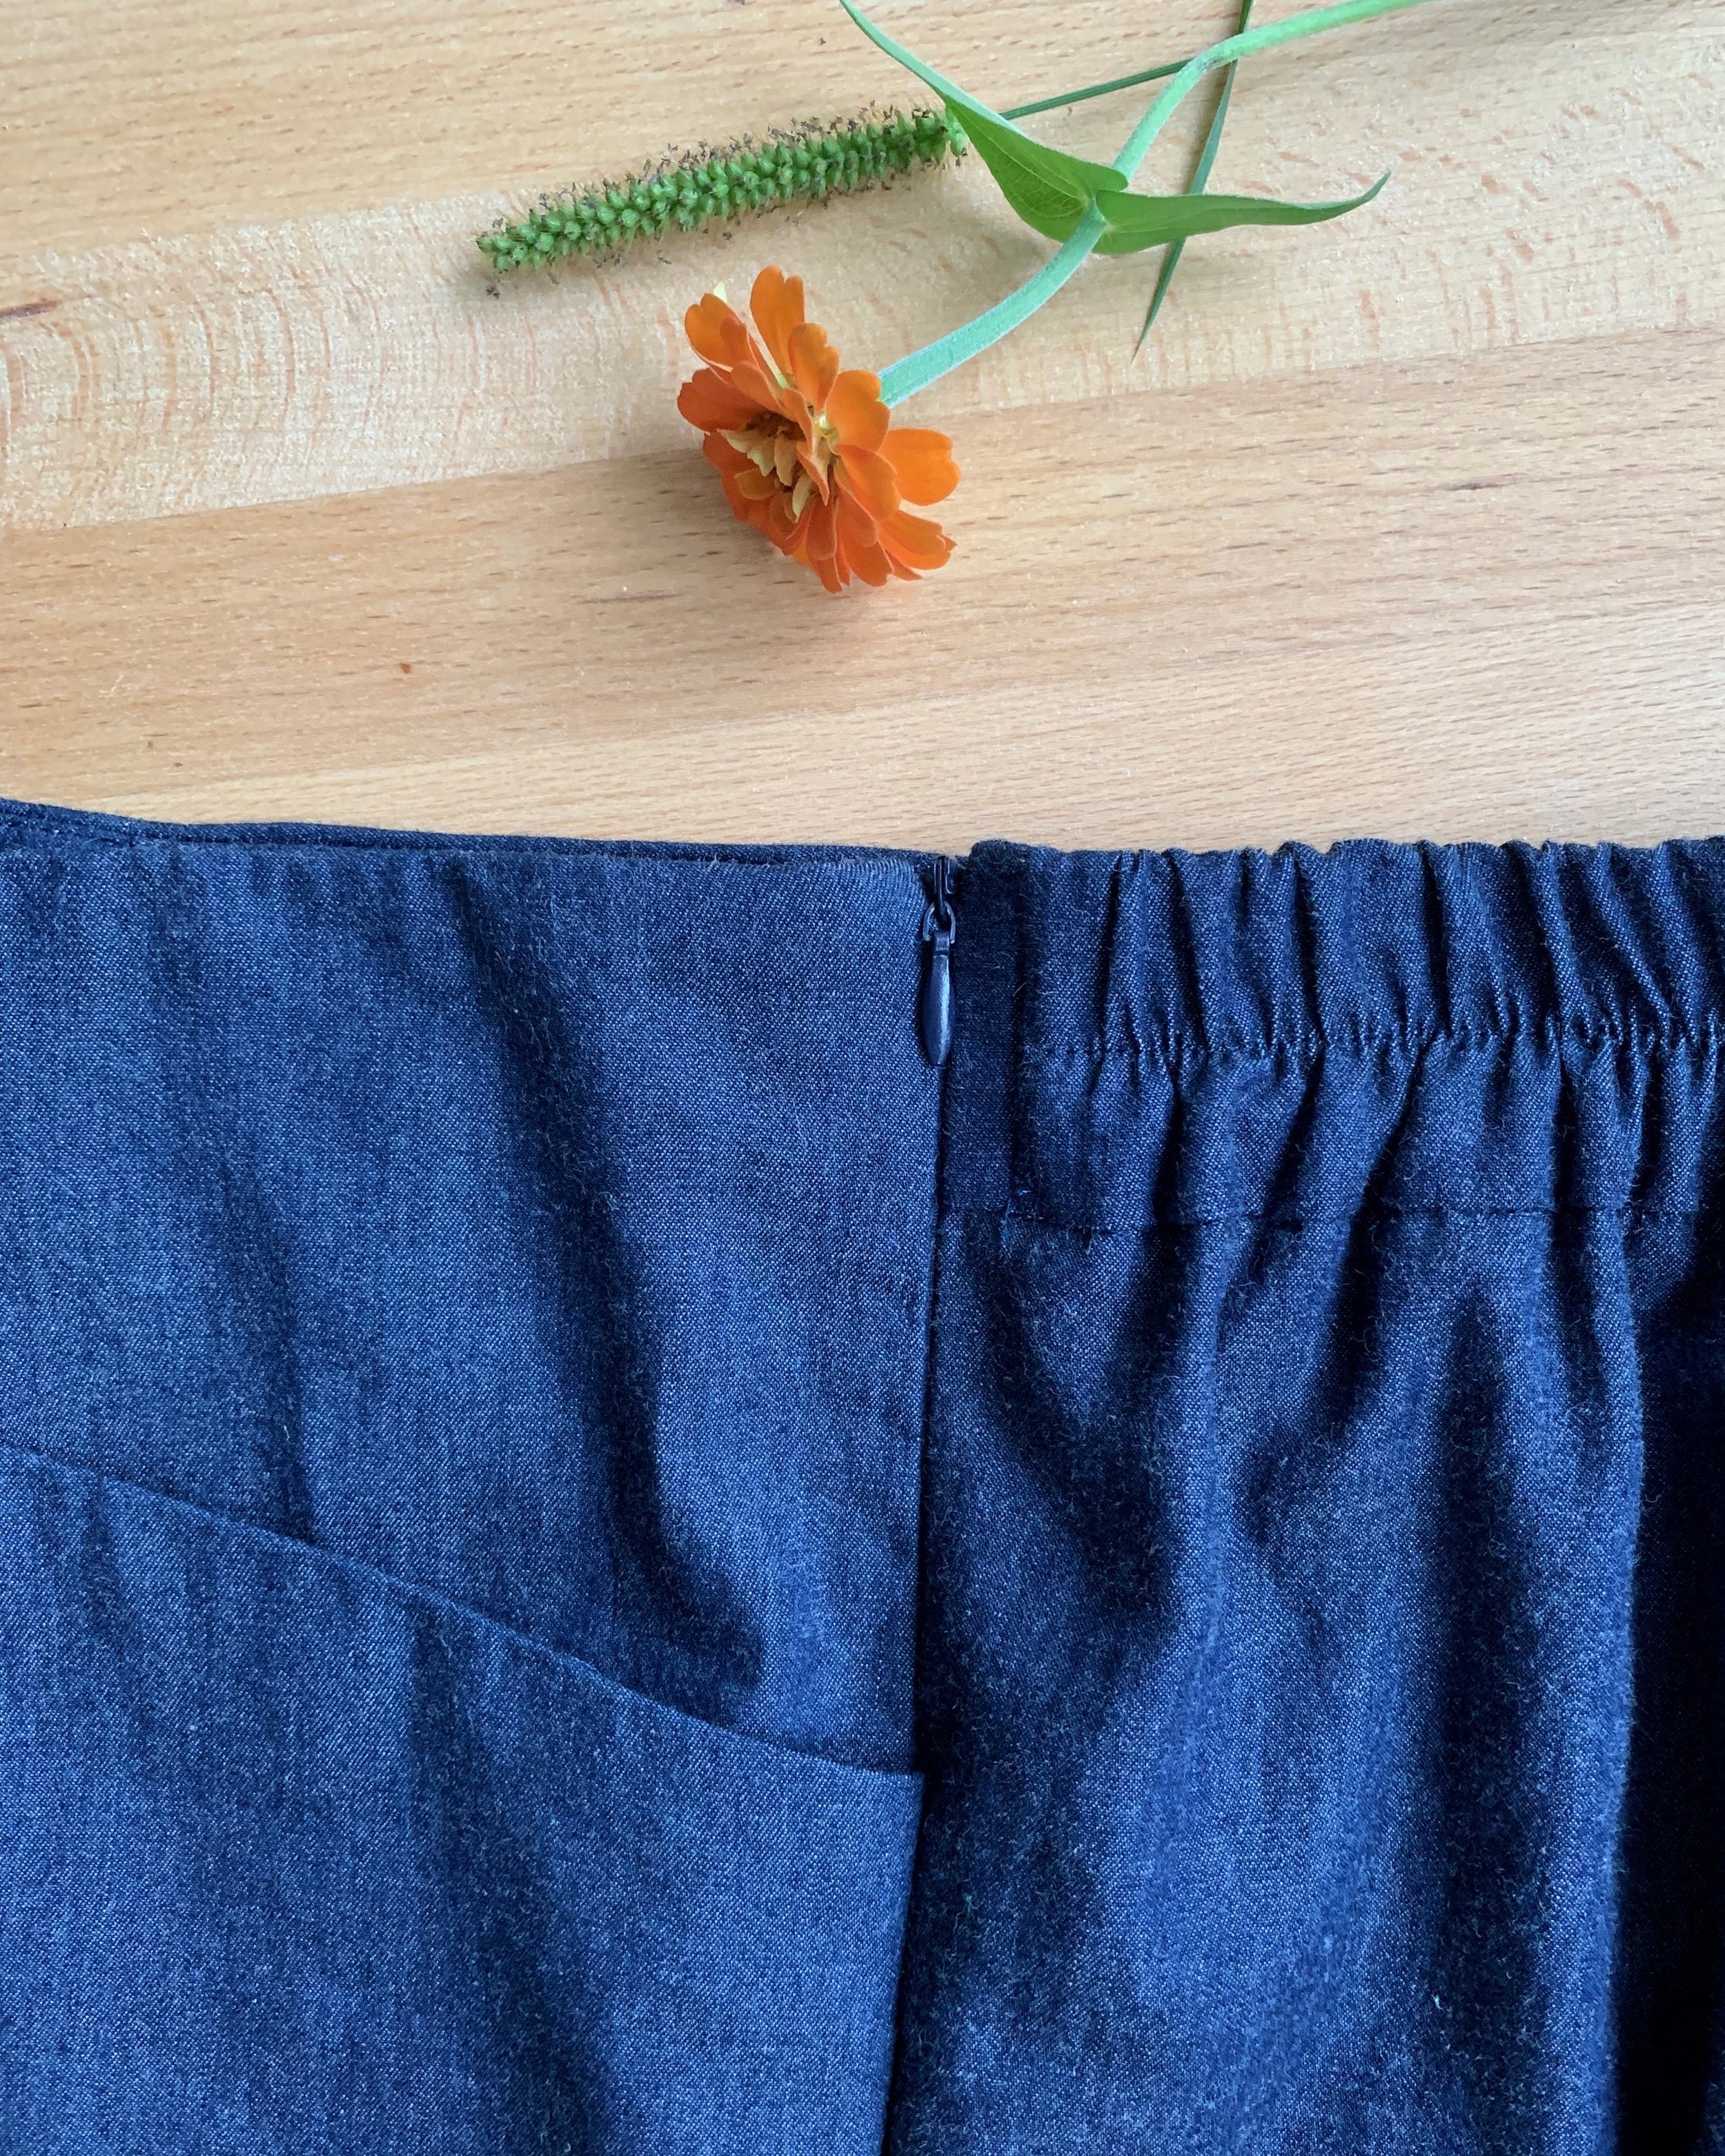 How to Add an Invisible Zipper to the Pietra Pants